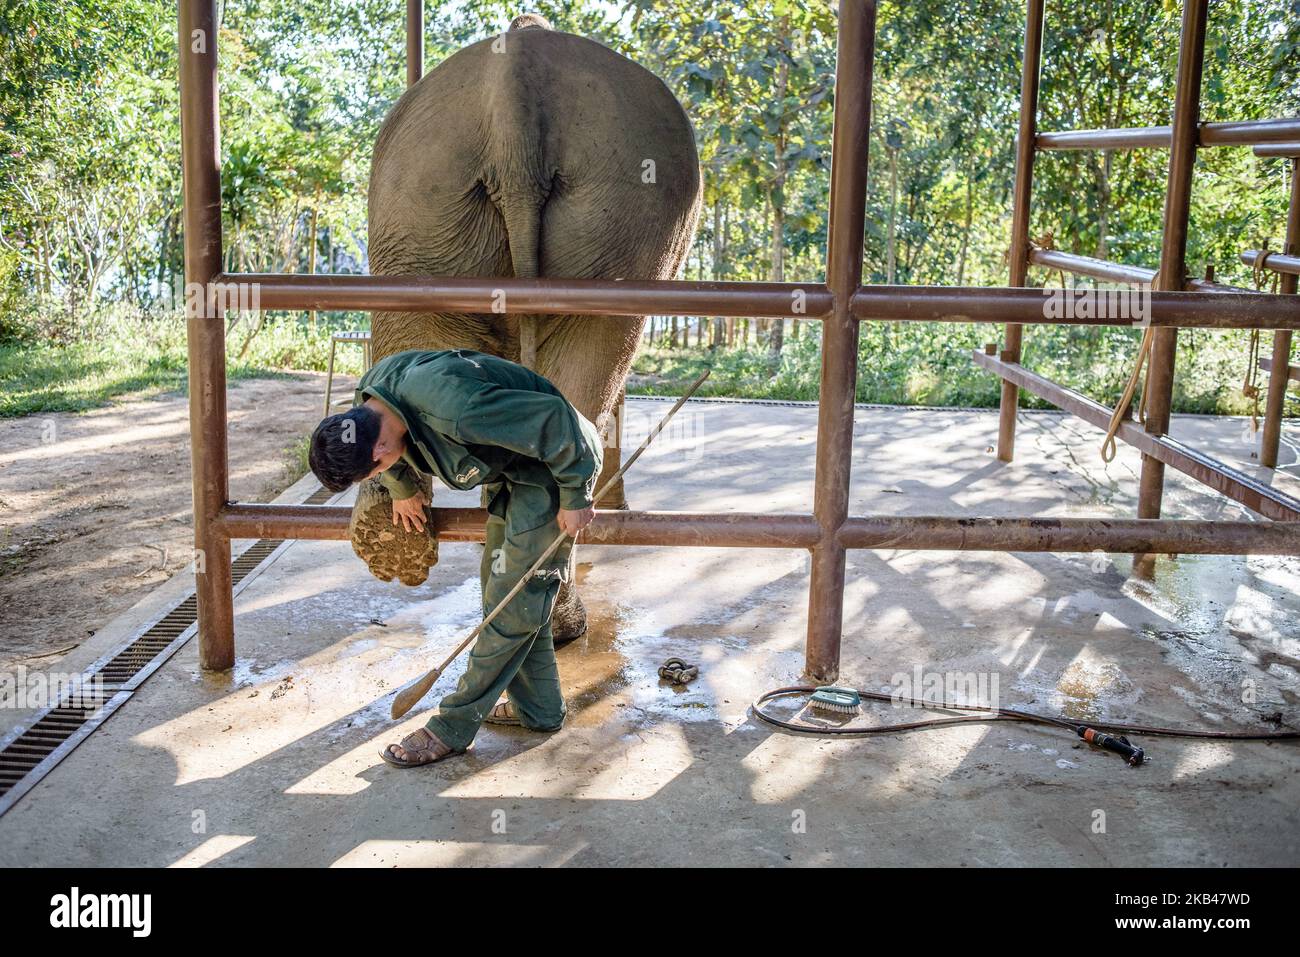 An elephant is on a daily examination at the hospital in the Elephant Conservation Center, Sayaboury, Laos, in December 2018. Laos was known as ‘The land of a million elephants’ in the past, today the elephant population in the country stands at around 800 individuals. Half of them is made up of captive elephants, and their number is in decline; the owners are not interested in breeding animals (the cow needs at least four years out of work during her pregnancy and lactation), illegal trafficking to China and other neighboring countries continues. Against this backdrop, the Elephant Conservati Stock Photo